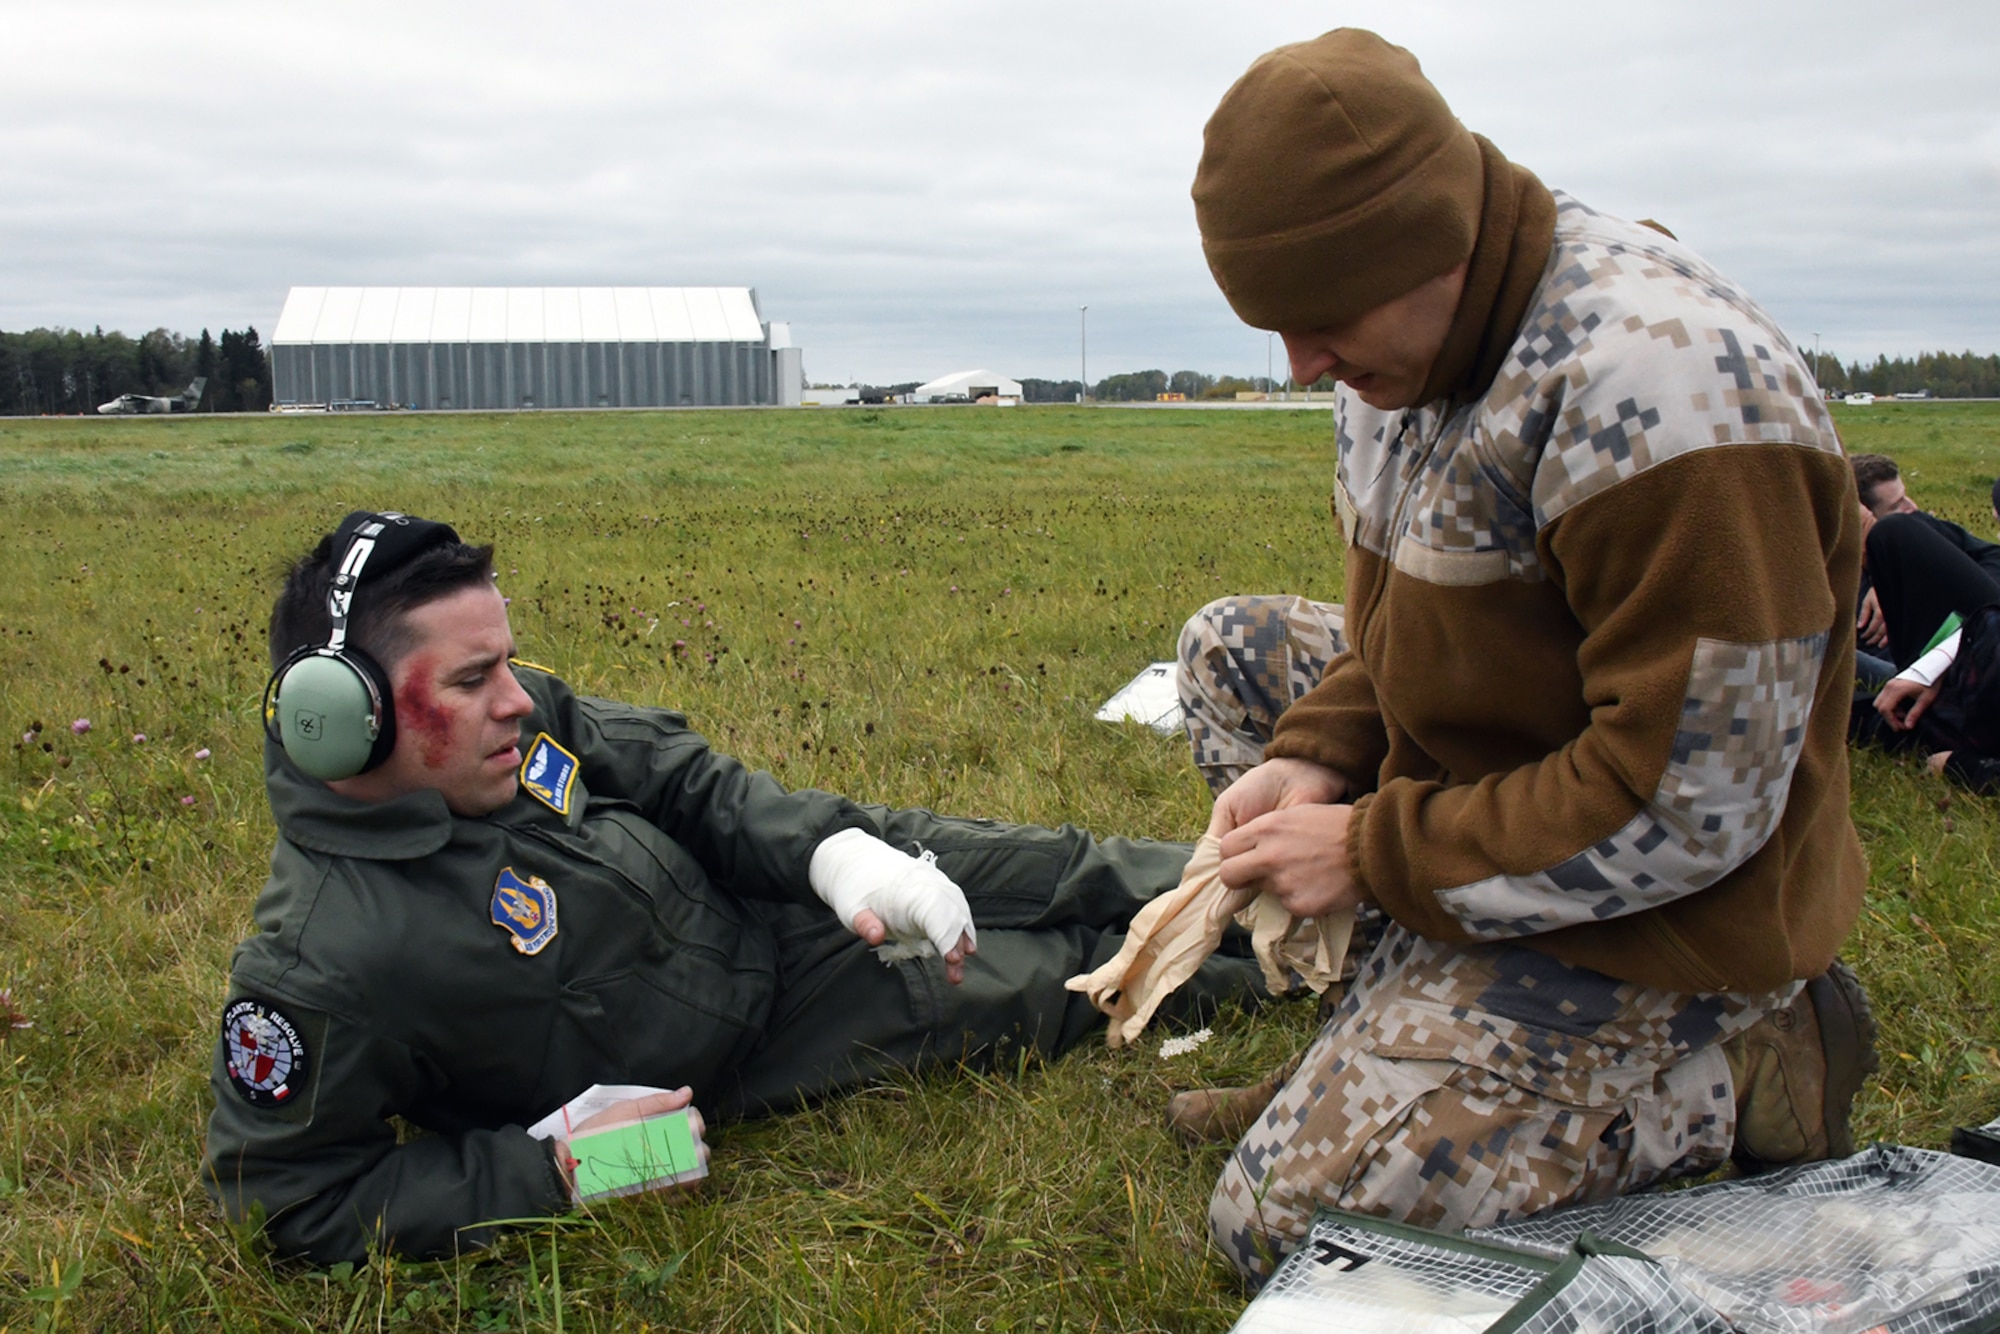 Senior Airman Joshua Stubbs, 700th Airlift Squadron loadmaster, receives simulated medical treatment from a Latvian air force medical technician during Sky Fist, an aircraft mishap training exercise, held at Lielvarde Air Base, Latvia, Oct. 6, 2016. Sky Fist was a bilateral exercise designed to strengthen the partnership between the U.S. and Latvia. (U.S. Air Force photo by Staff Sgt. Alan Abernethy)